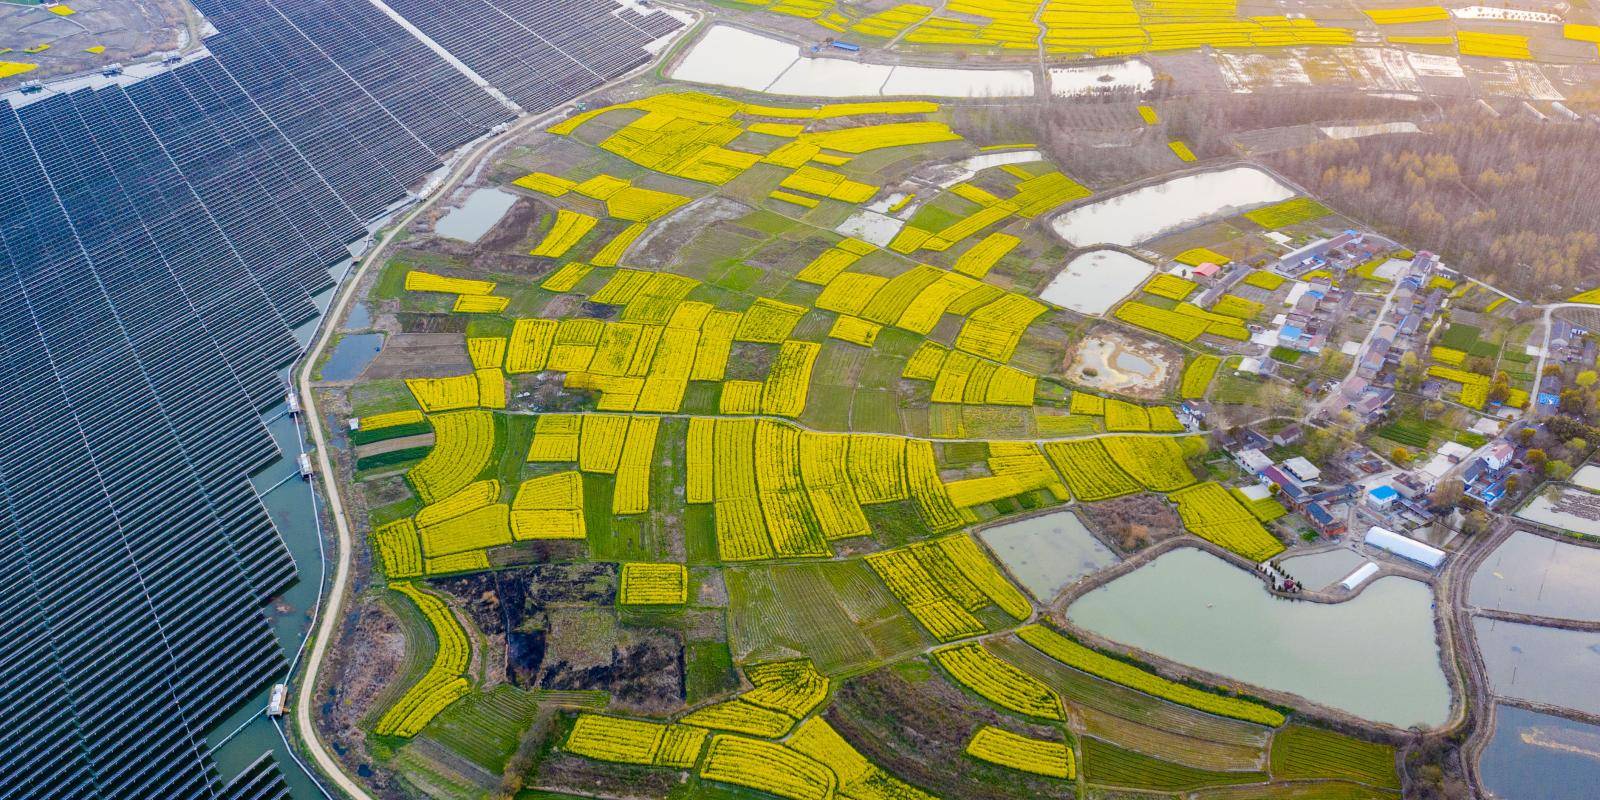 Solar-fishery plant in China